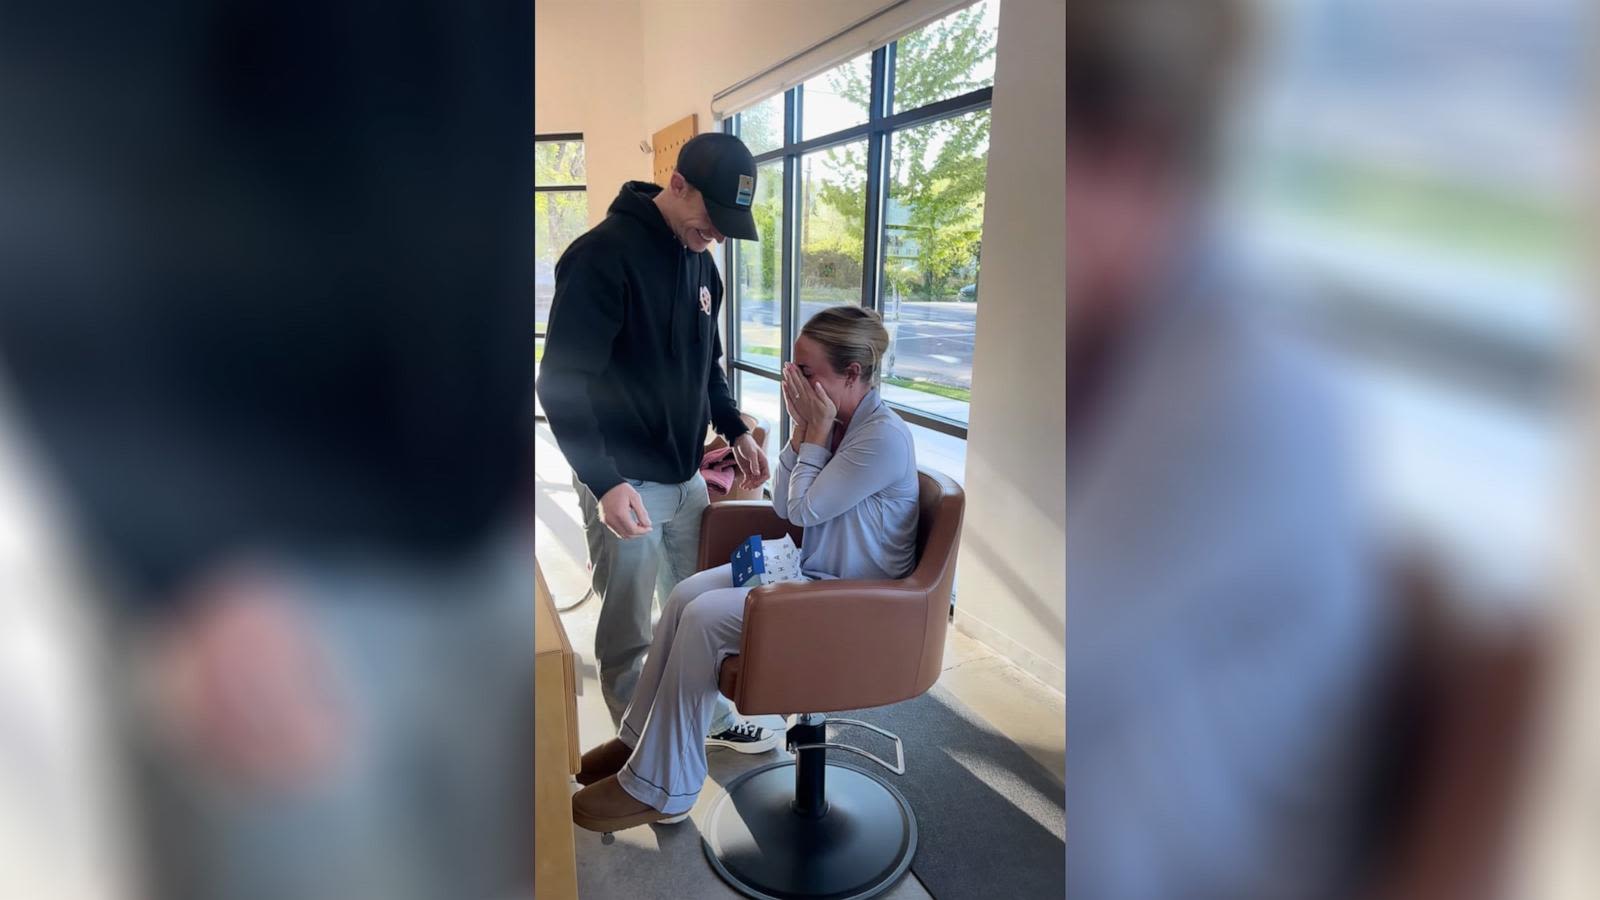 Brother surprises sister on wedding day to walk her down the aisle